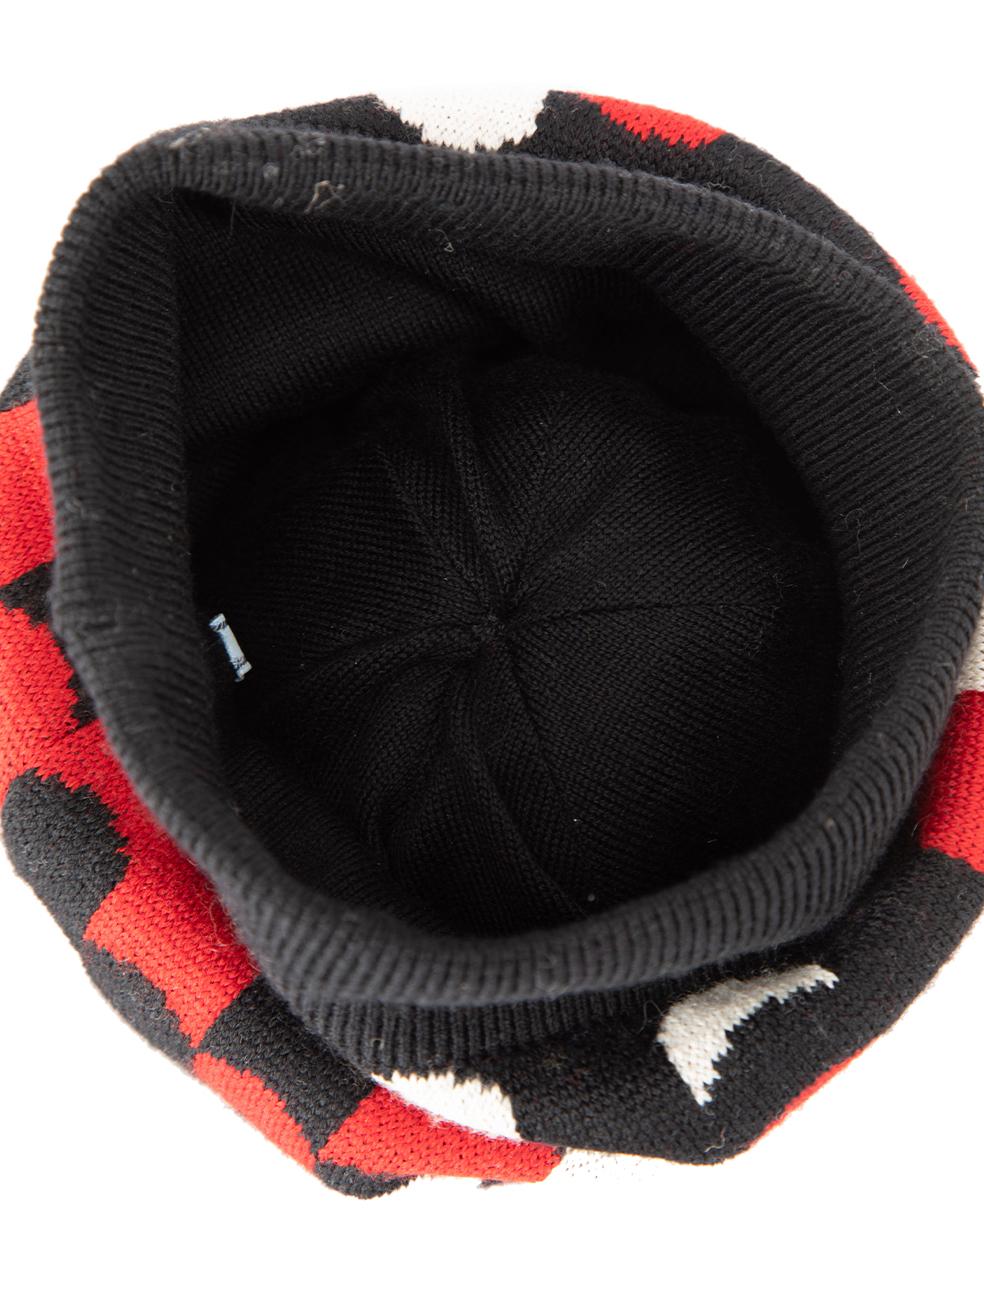 Prada Women's Black & Red Patterned Fur Pom Pom Beanie In Good Condition For Sale In London, GB